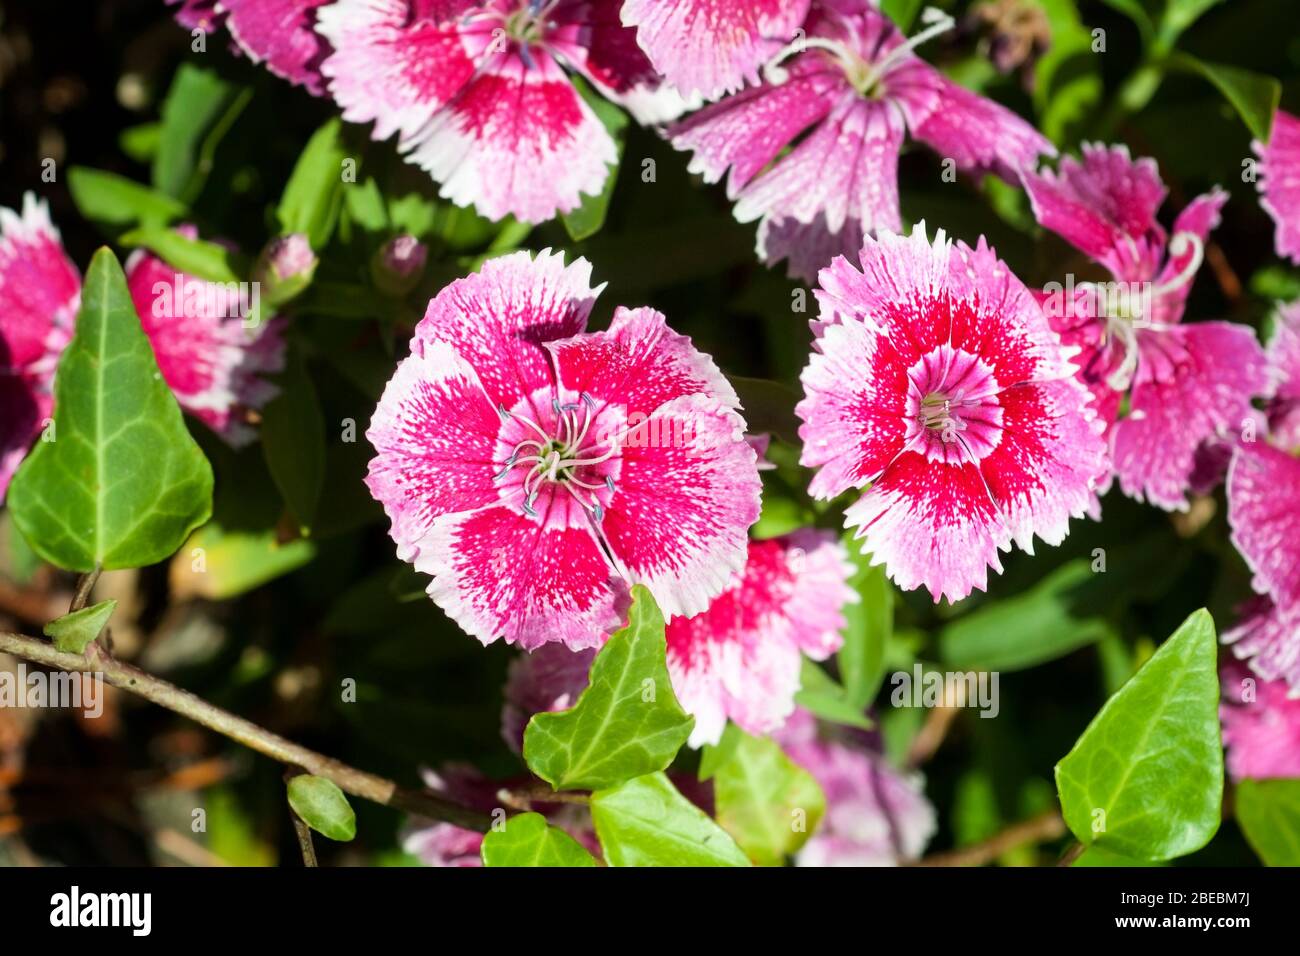 White and red flowers of Rainbow pink, Dianthus chinensis Stock Photo